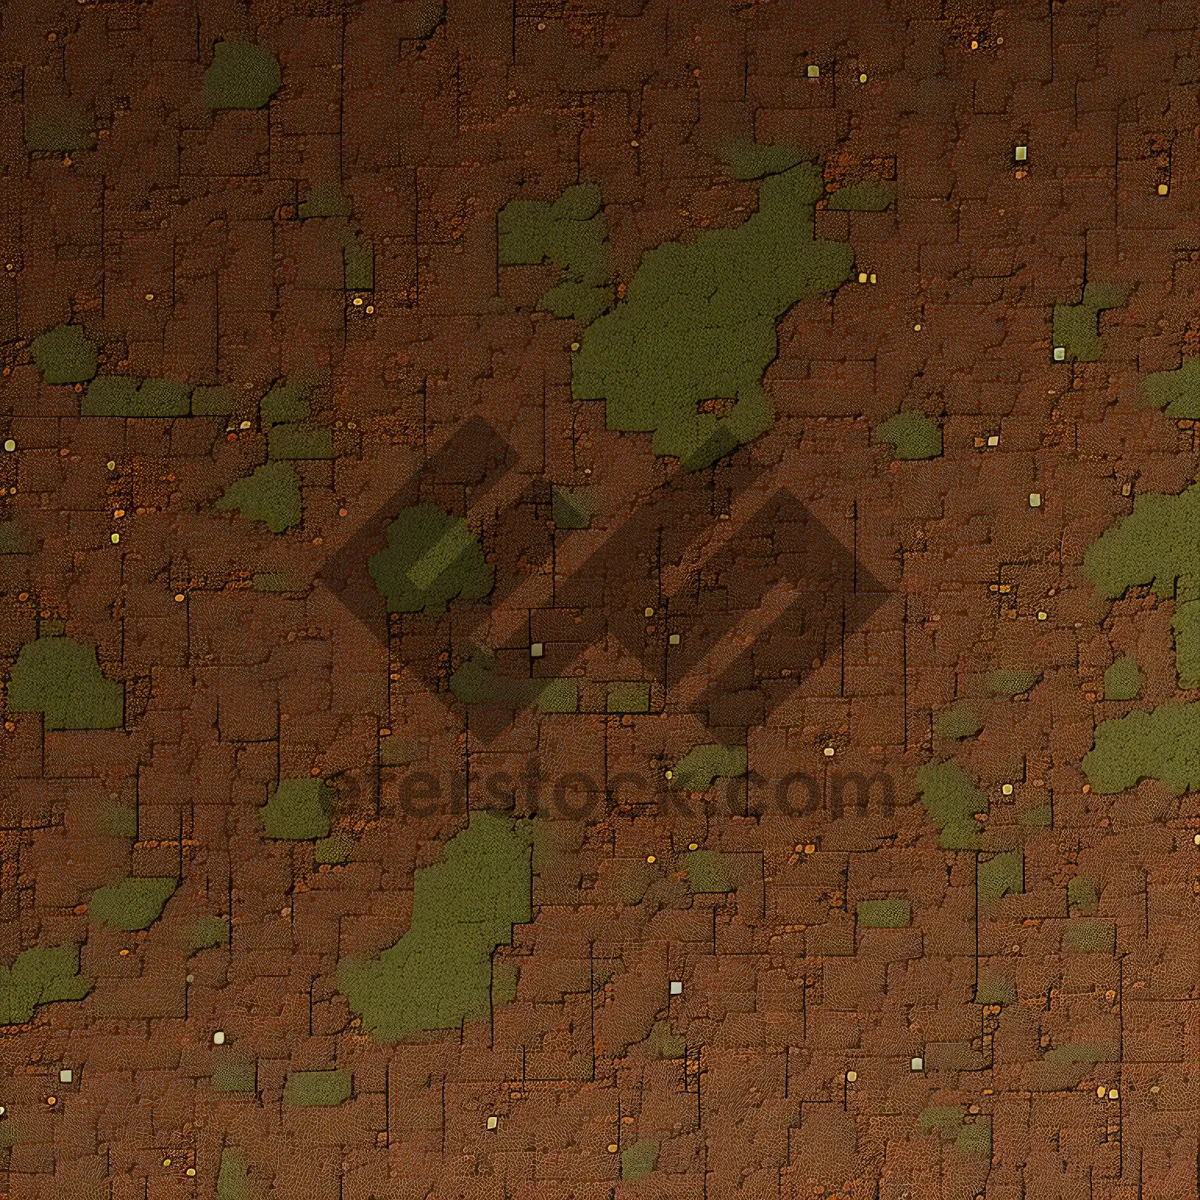 Picture of Grunge Business Puzzle Piece Texture Mapping Strategy Solution